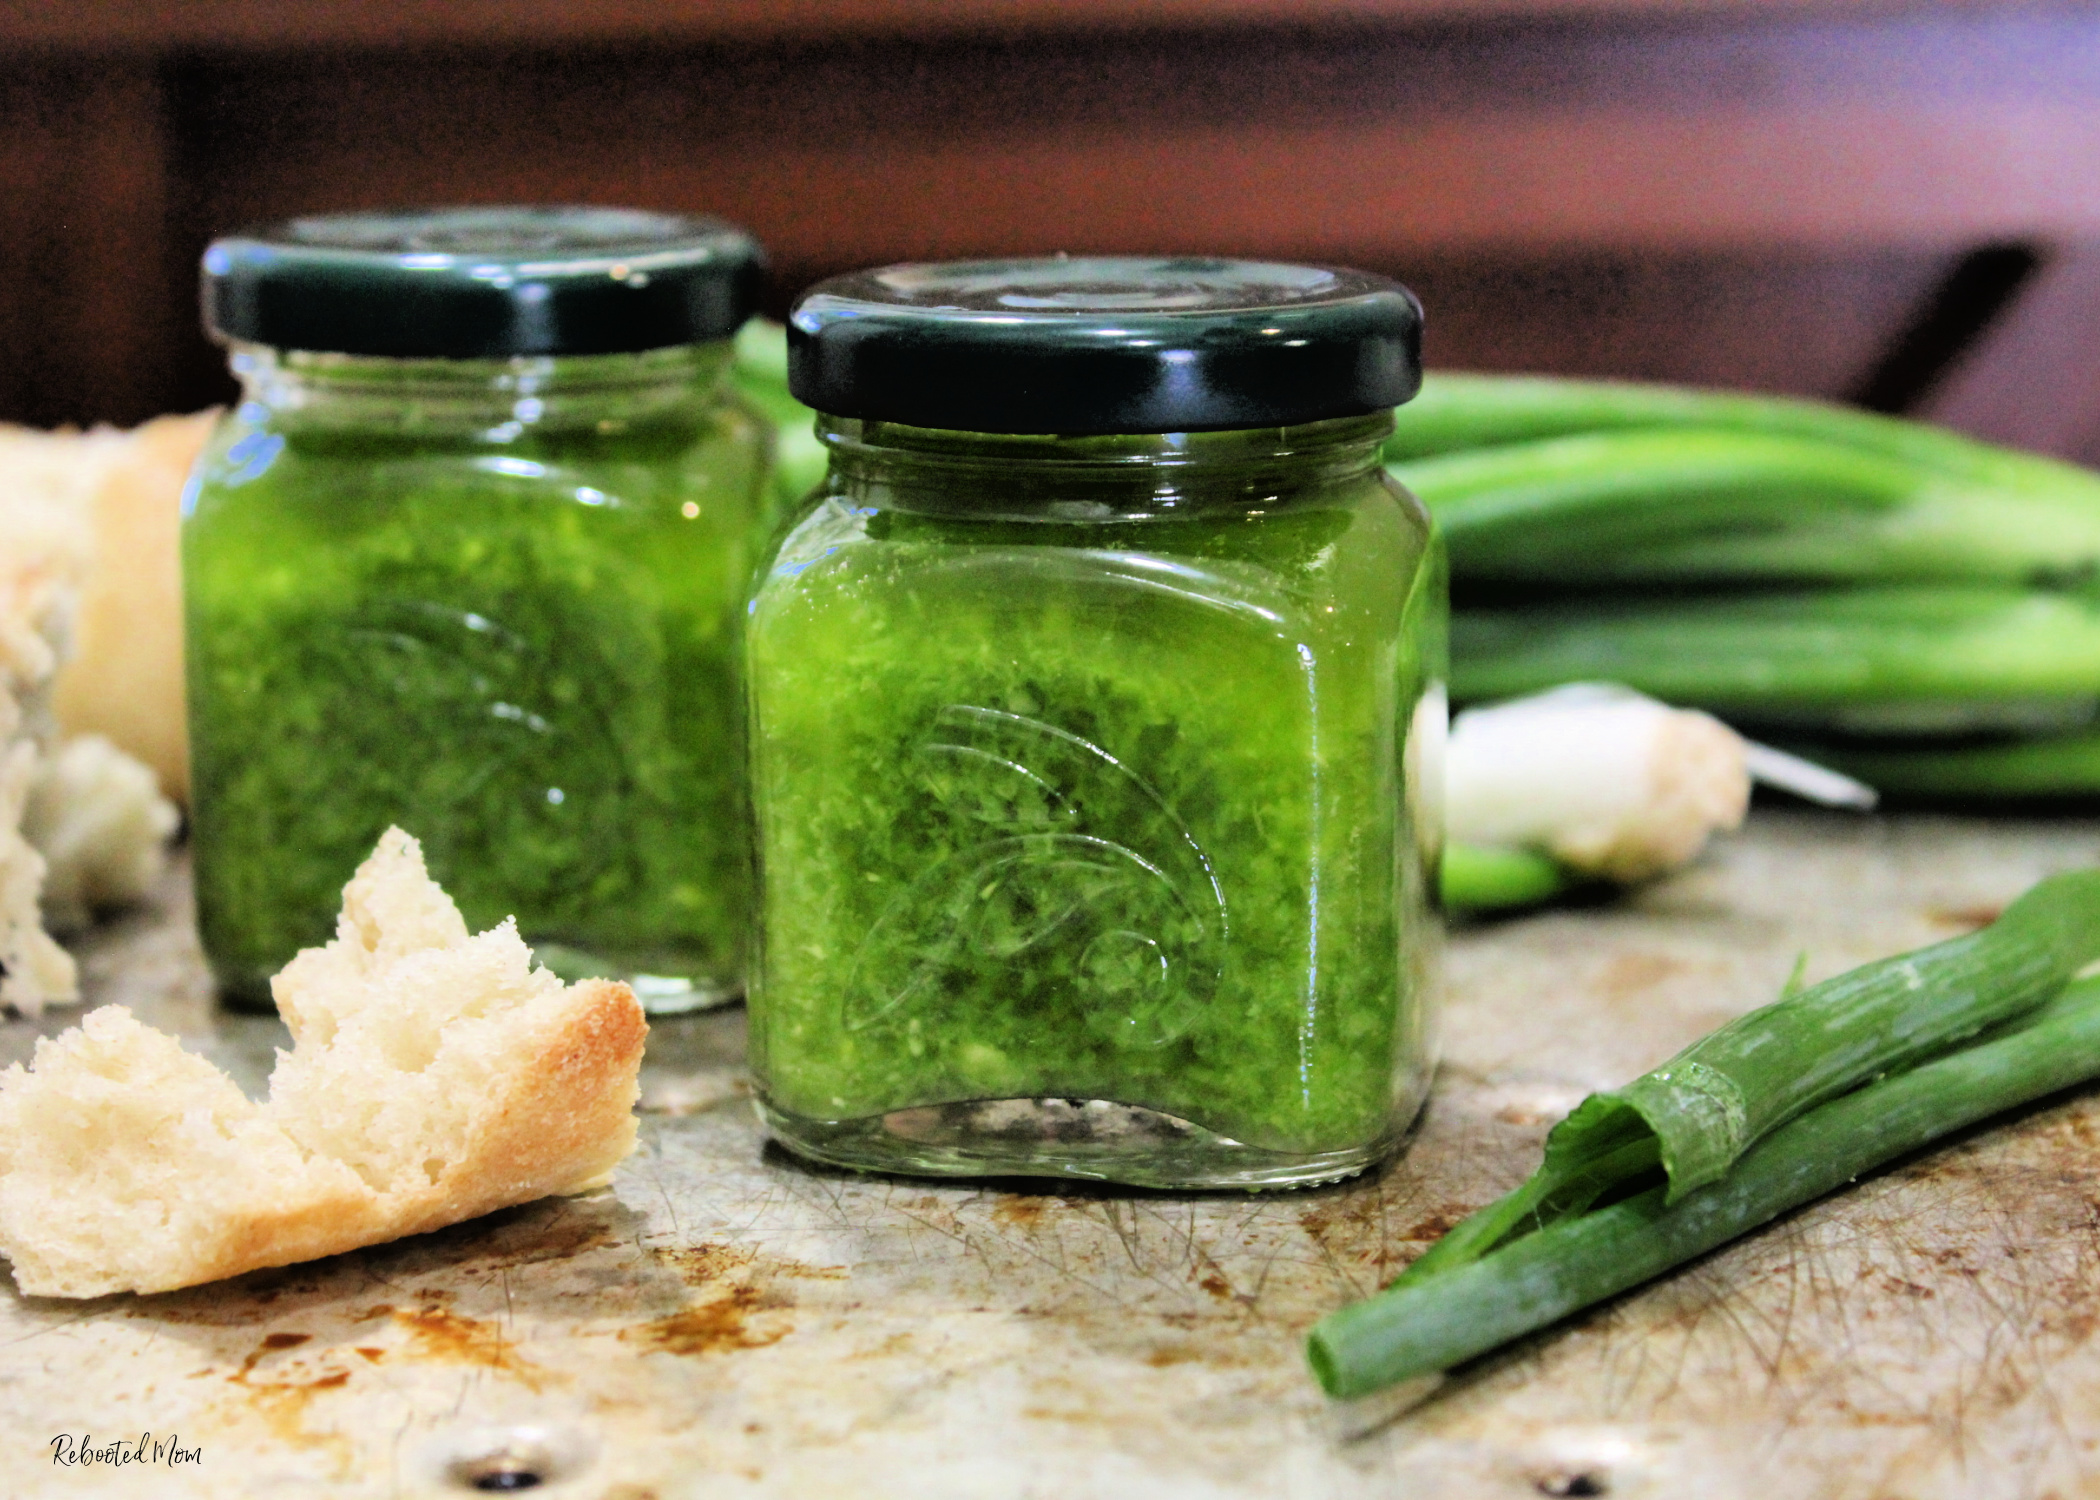 Use up an abundance of scallion greens! This Scallion Greens and Ginger Sauce comes together quickly for a bright, herby sauce that works spectacular on seafood, chicken, rice or as a dip for bread!